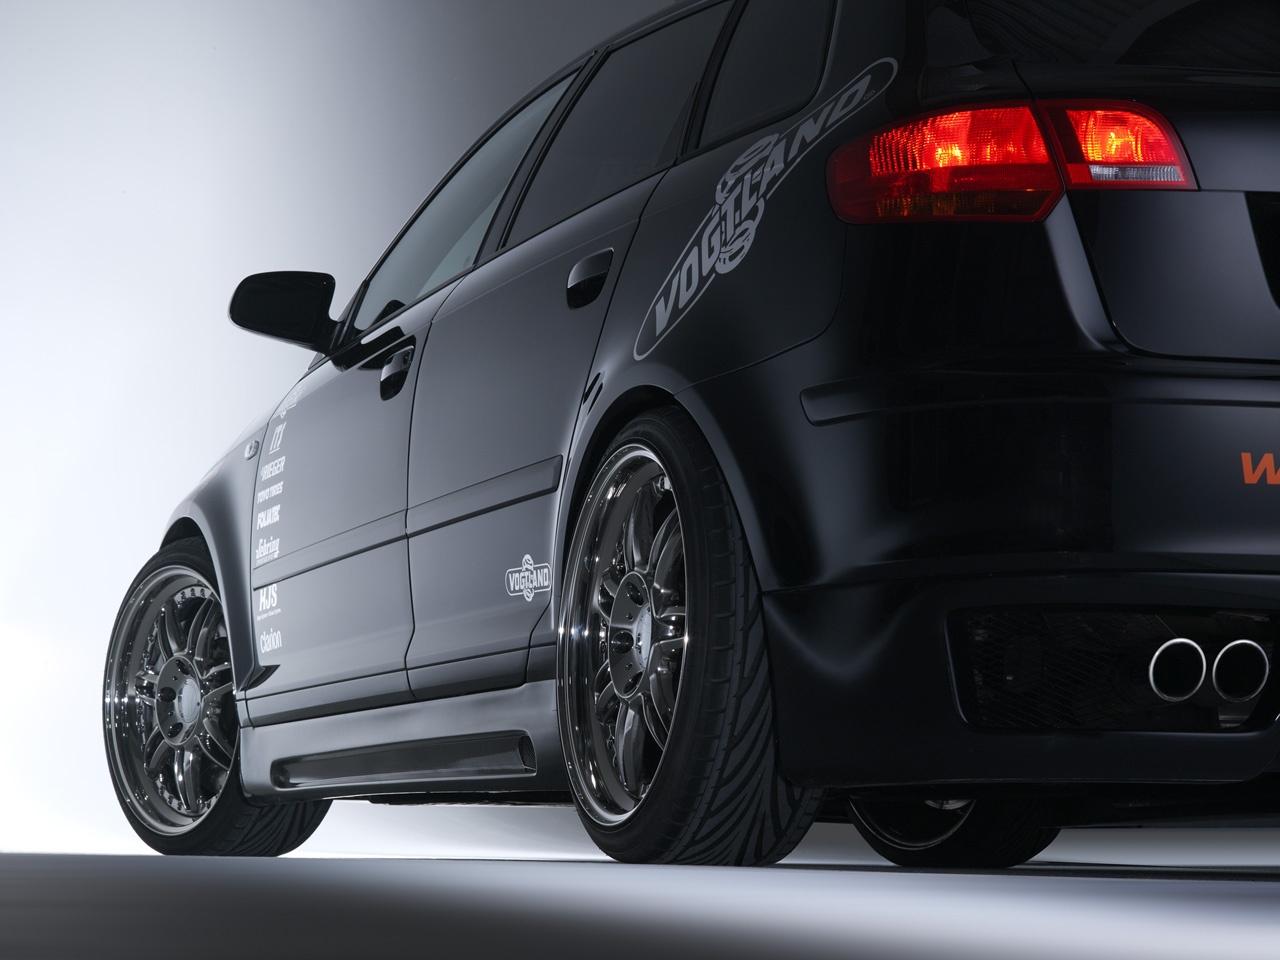 Audi image Audi A3 HD wallpapers and backgrounds photos